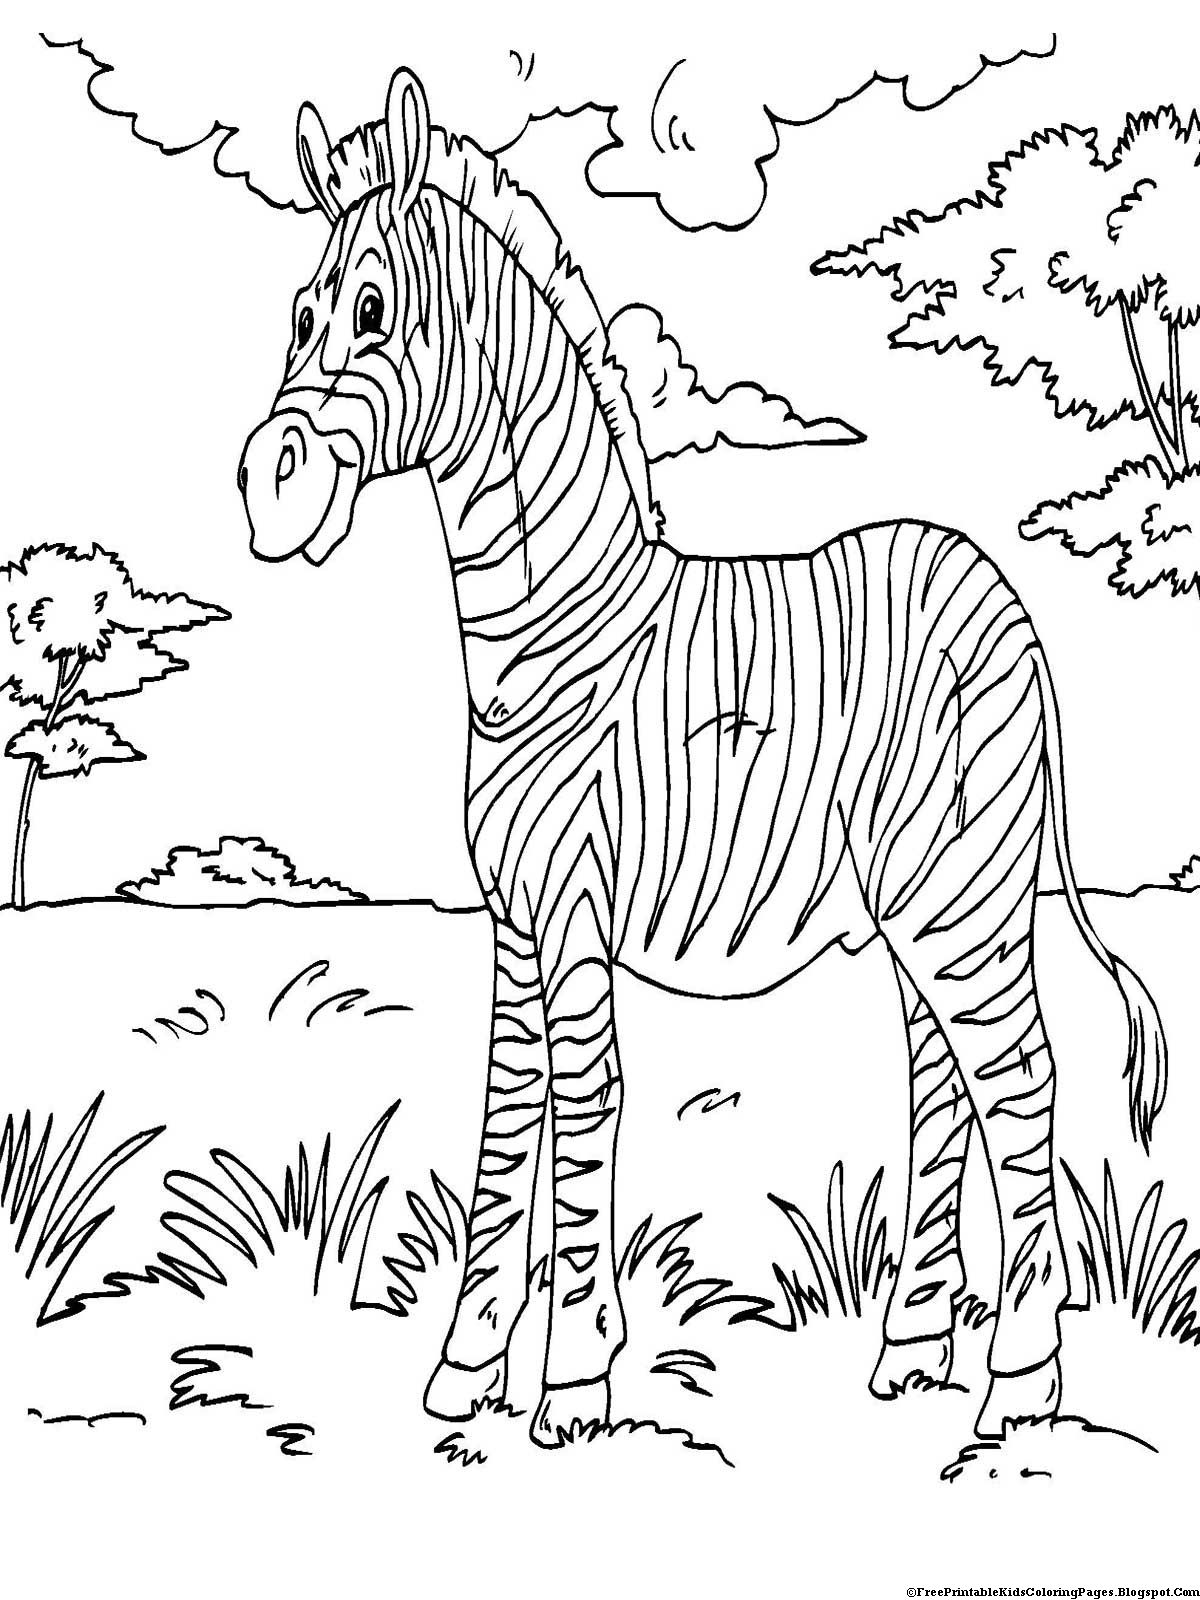 Bokito The Gorilla Coloring Pages - Coloring Home